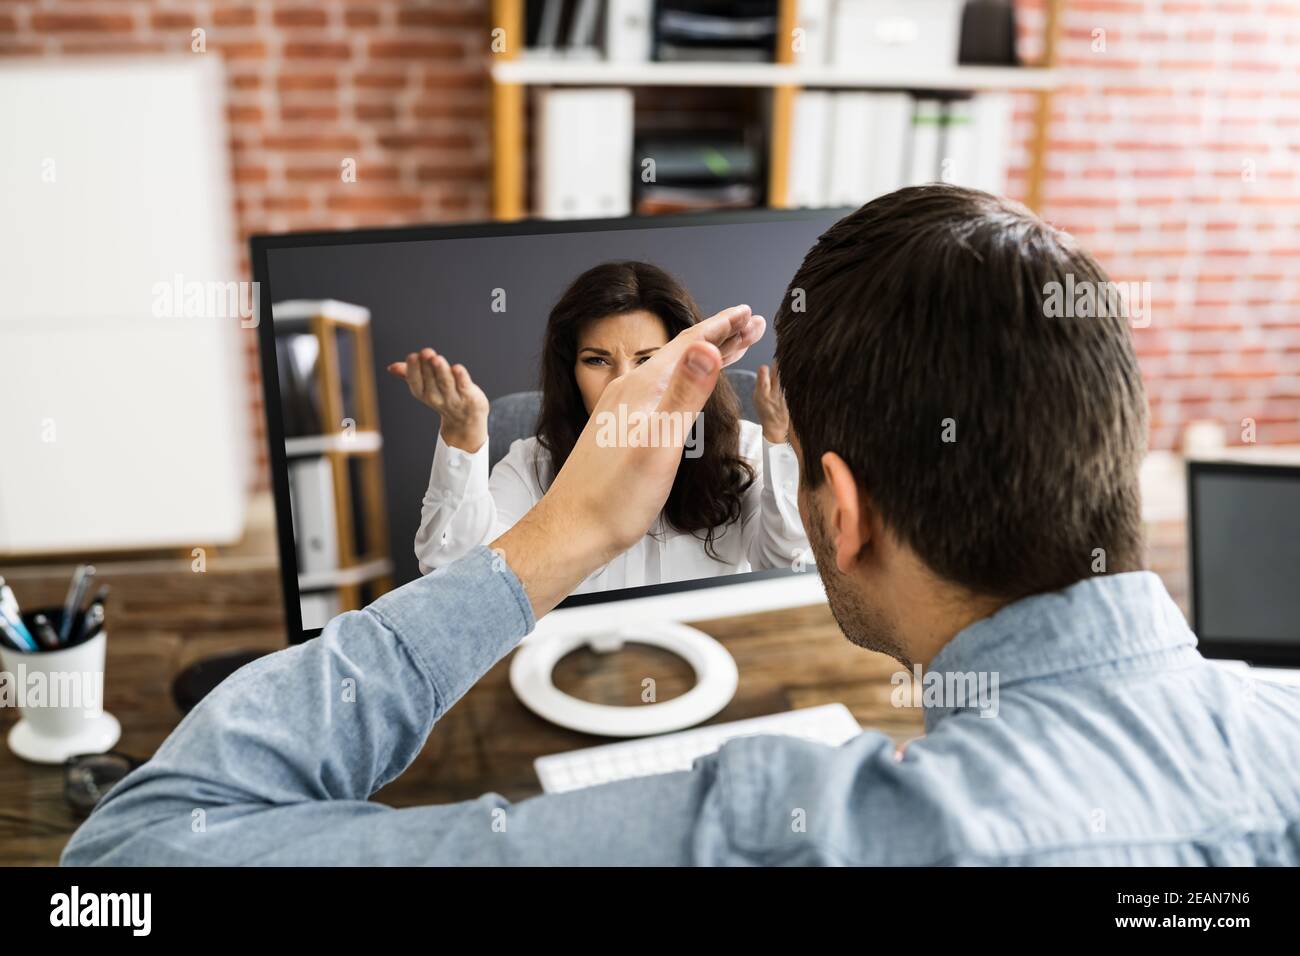 Arguing Fighting Corporate Business Coworkers Stock Photo